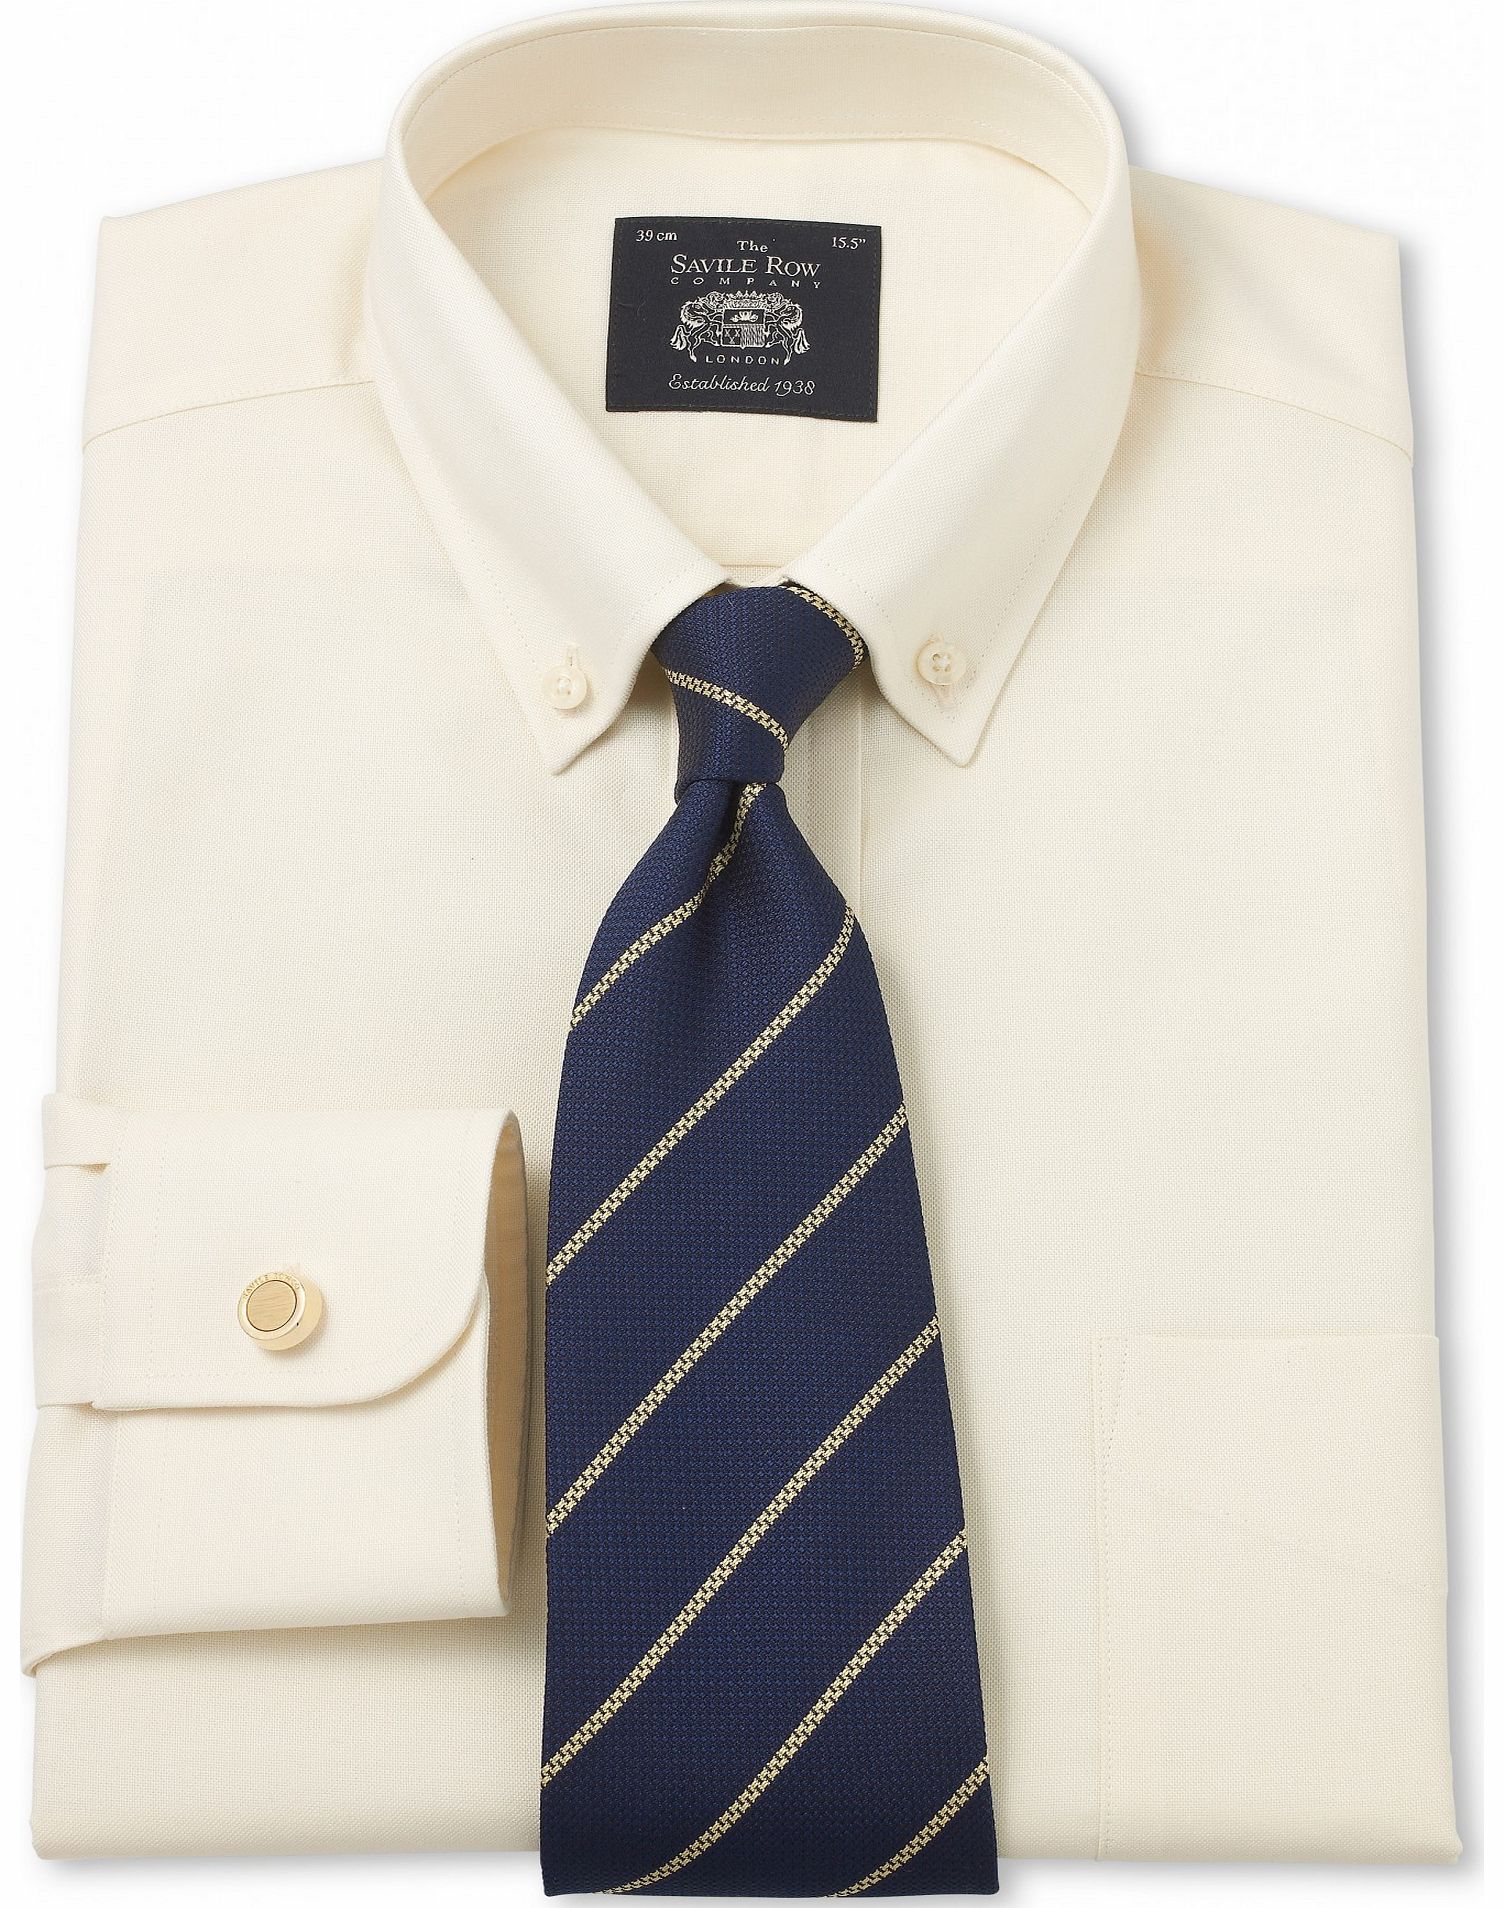 Savile Row Company Cream Pinpoint Classic Fit Shirt 15 1/2``